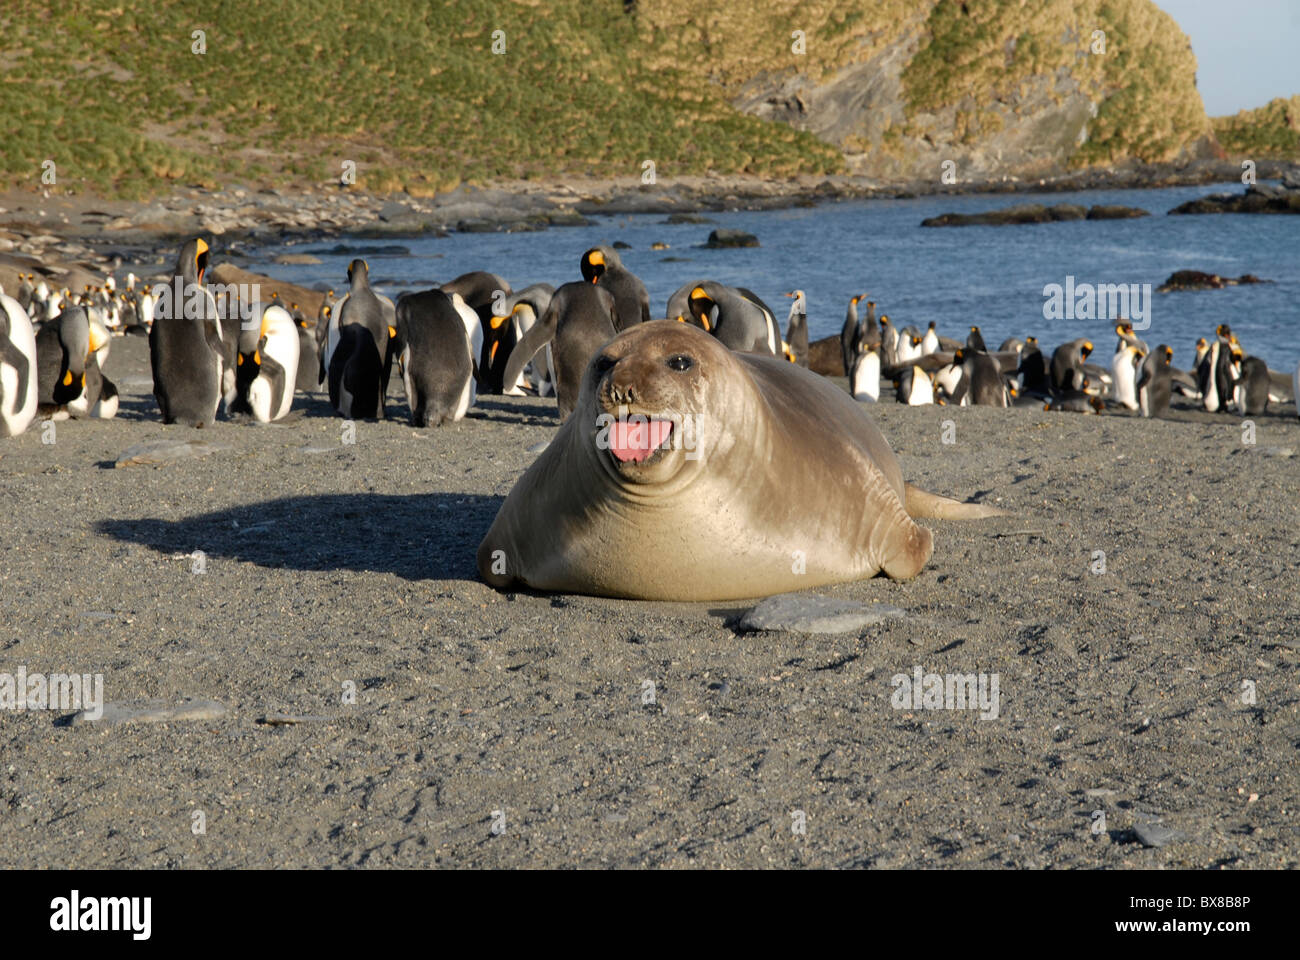 A young elephant seal (mirounga leonina) and King Penguins at the beach, Gold Harbour, South Georgia Stock Photo